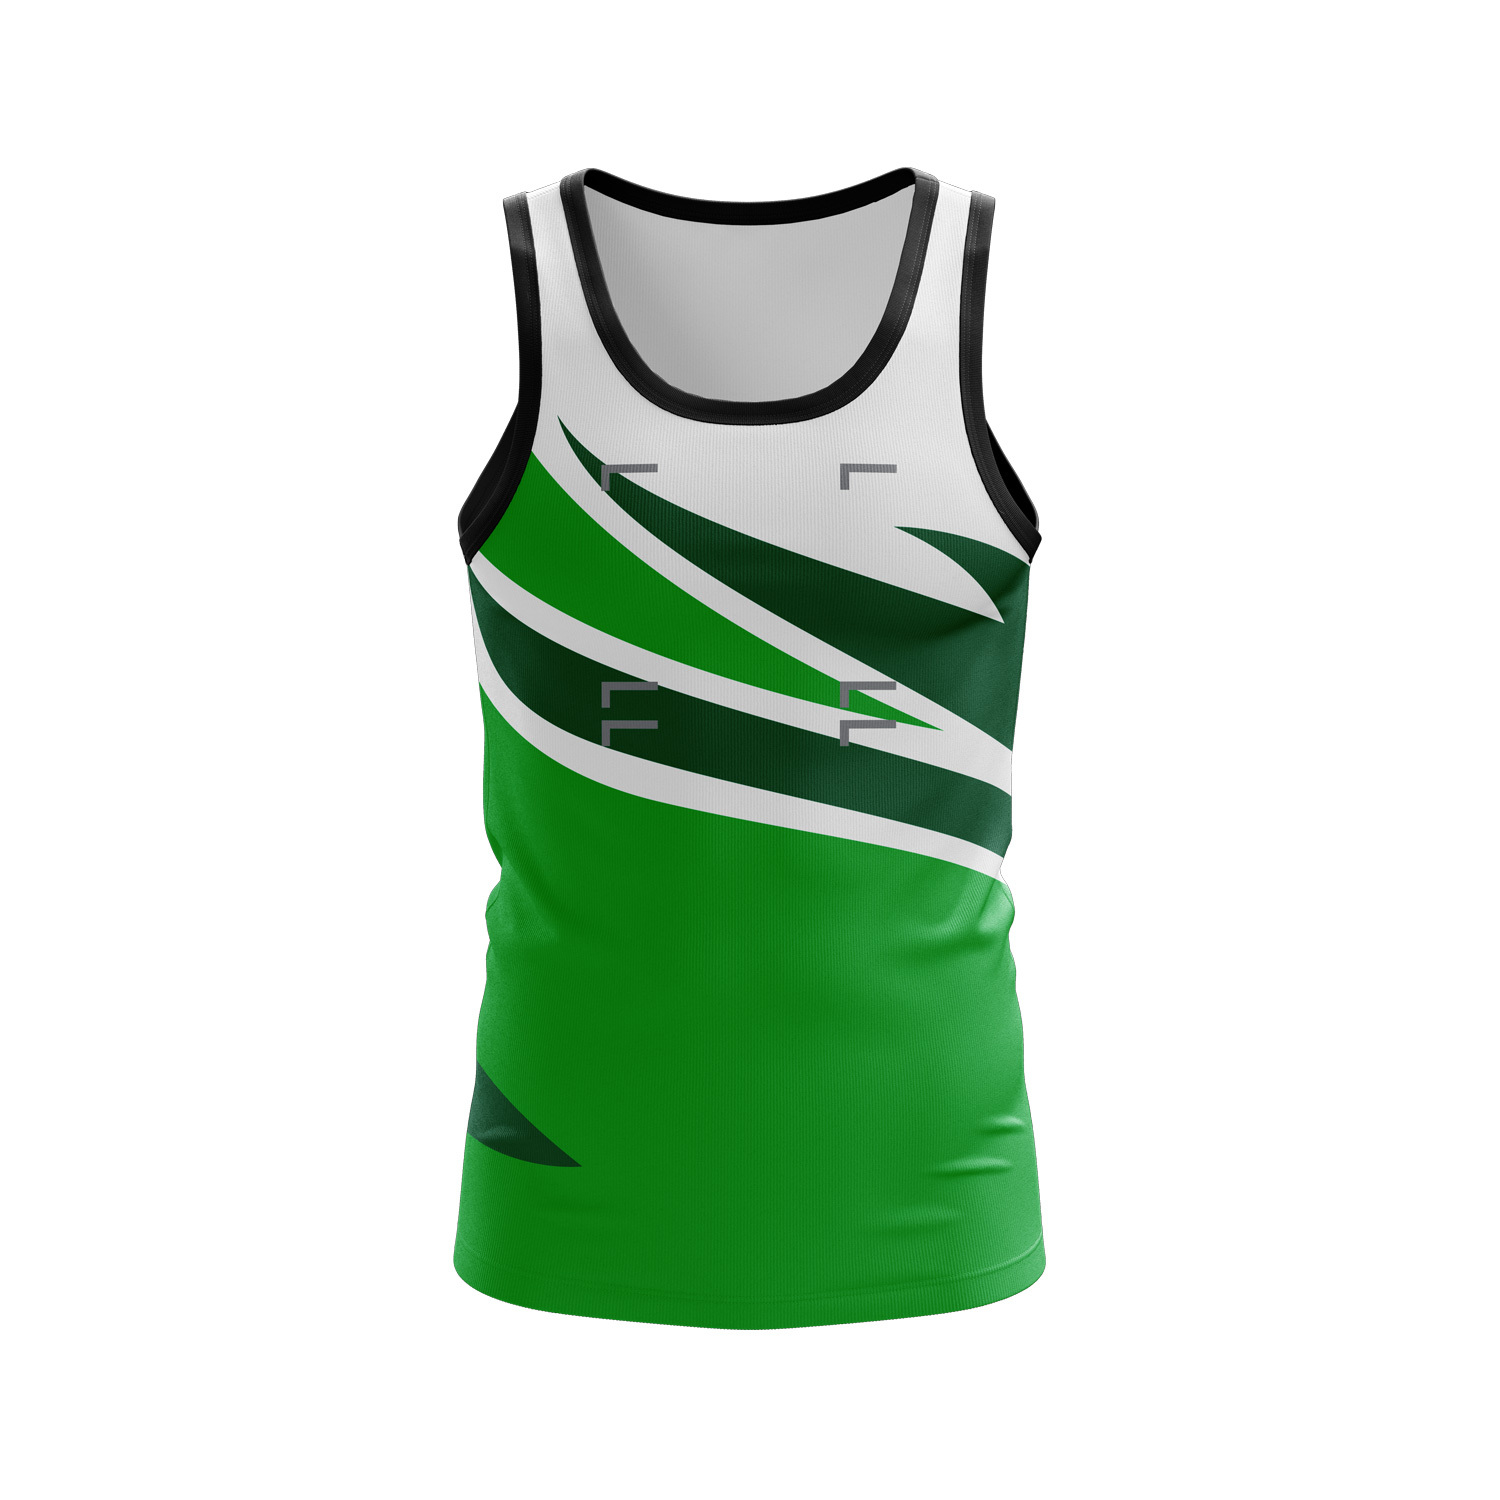 Sublimated Netball SInglets | Sublimated Netball Uniforms in Perth,WA